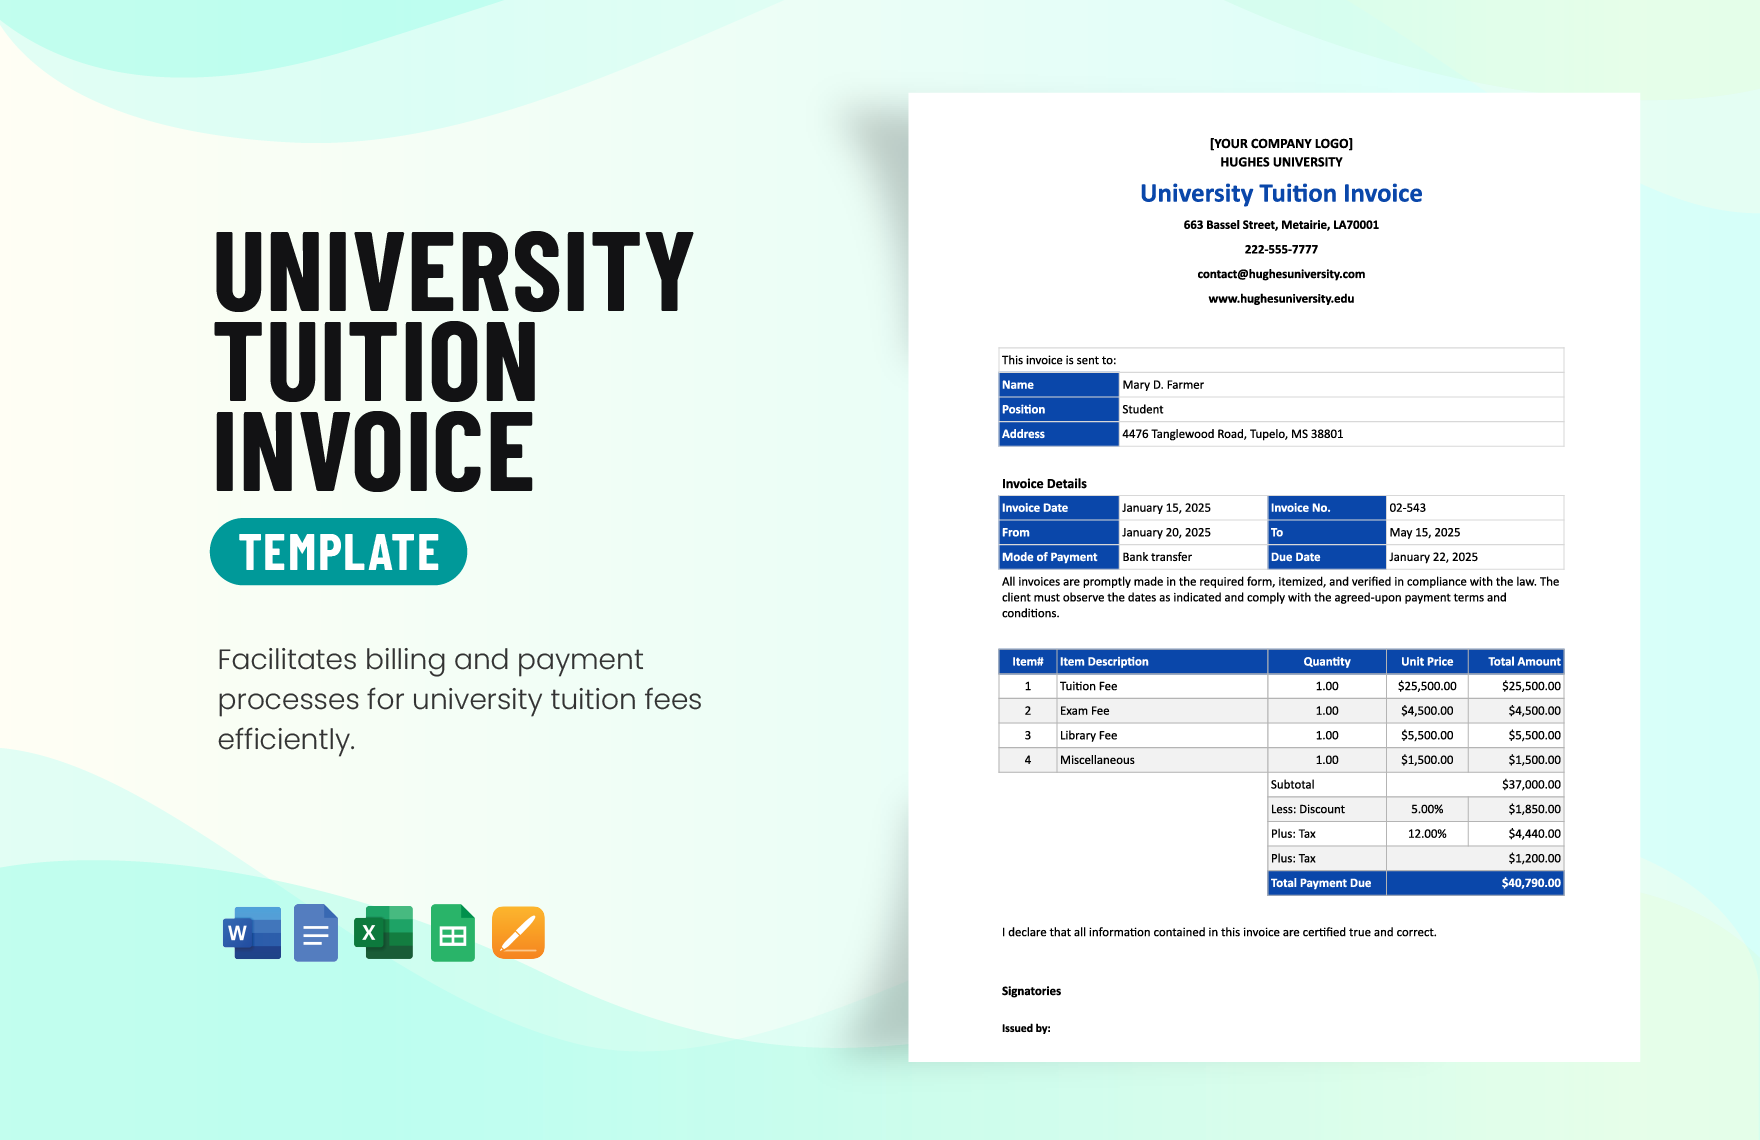 University Tuition Invoice Template in Word, Google Docs, Excel, Google Sheets, Apple Pages